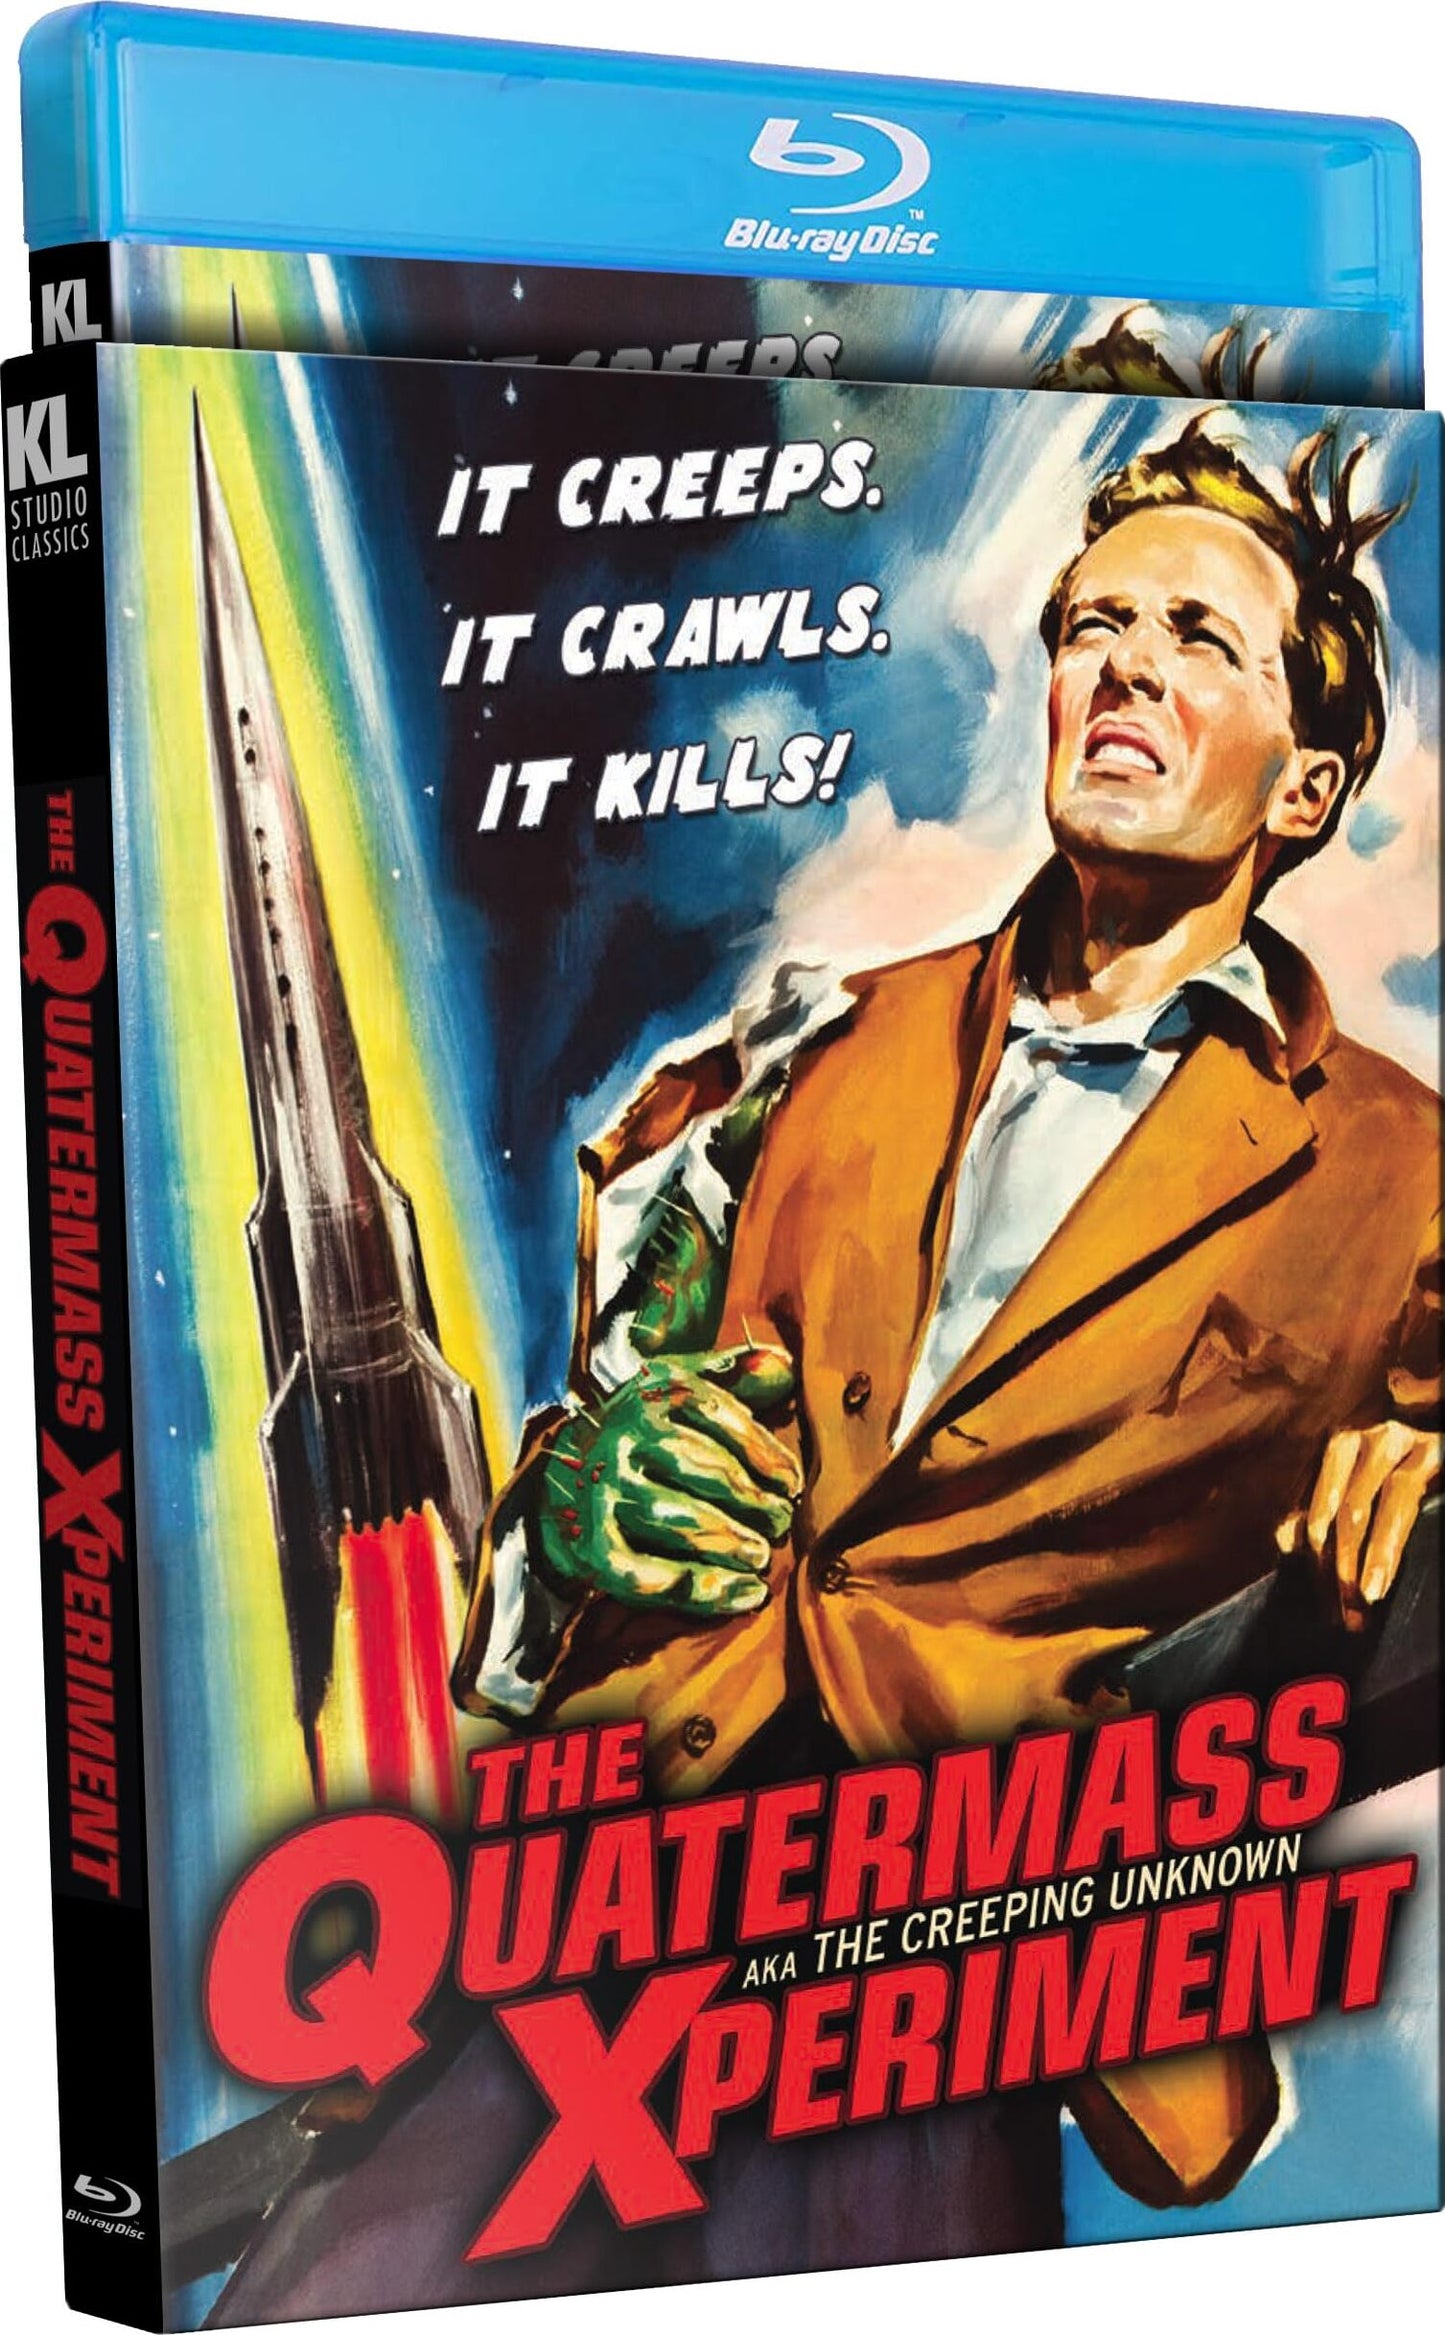 The Quatermass Xperiment (The Creeping Unknown)(Re-release)